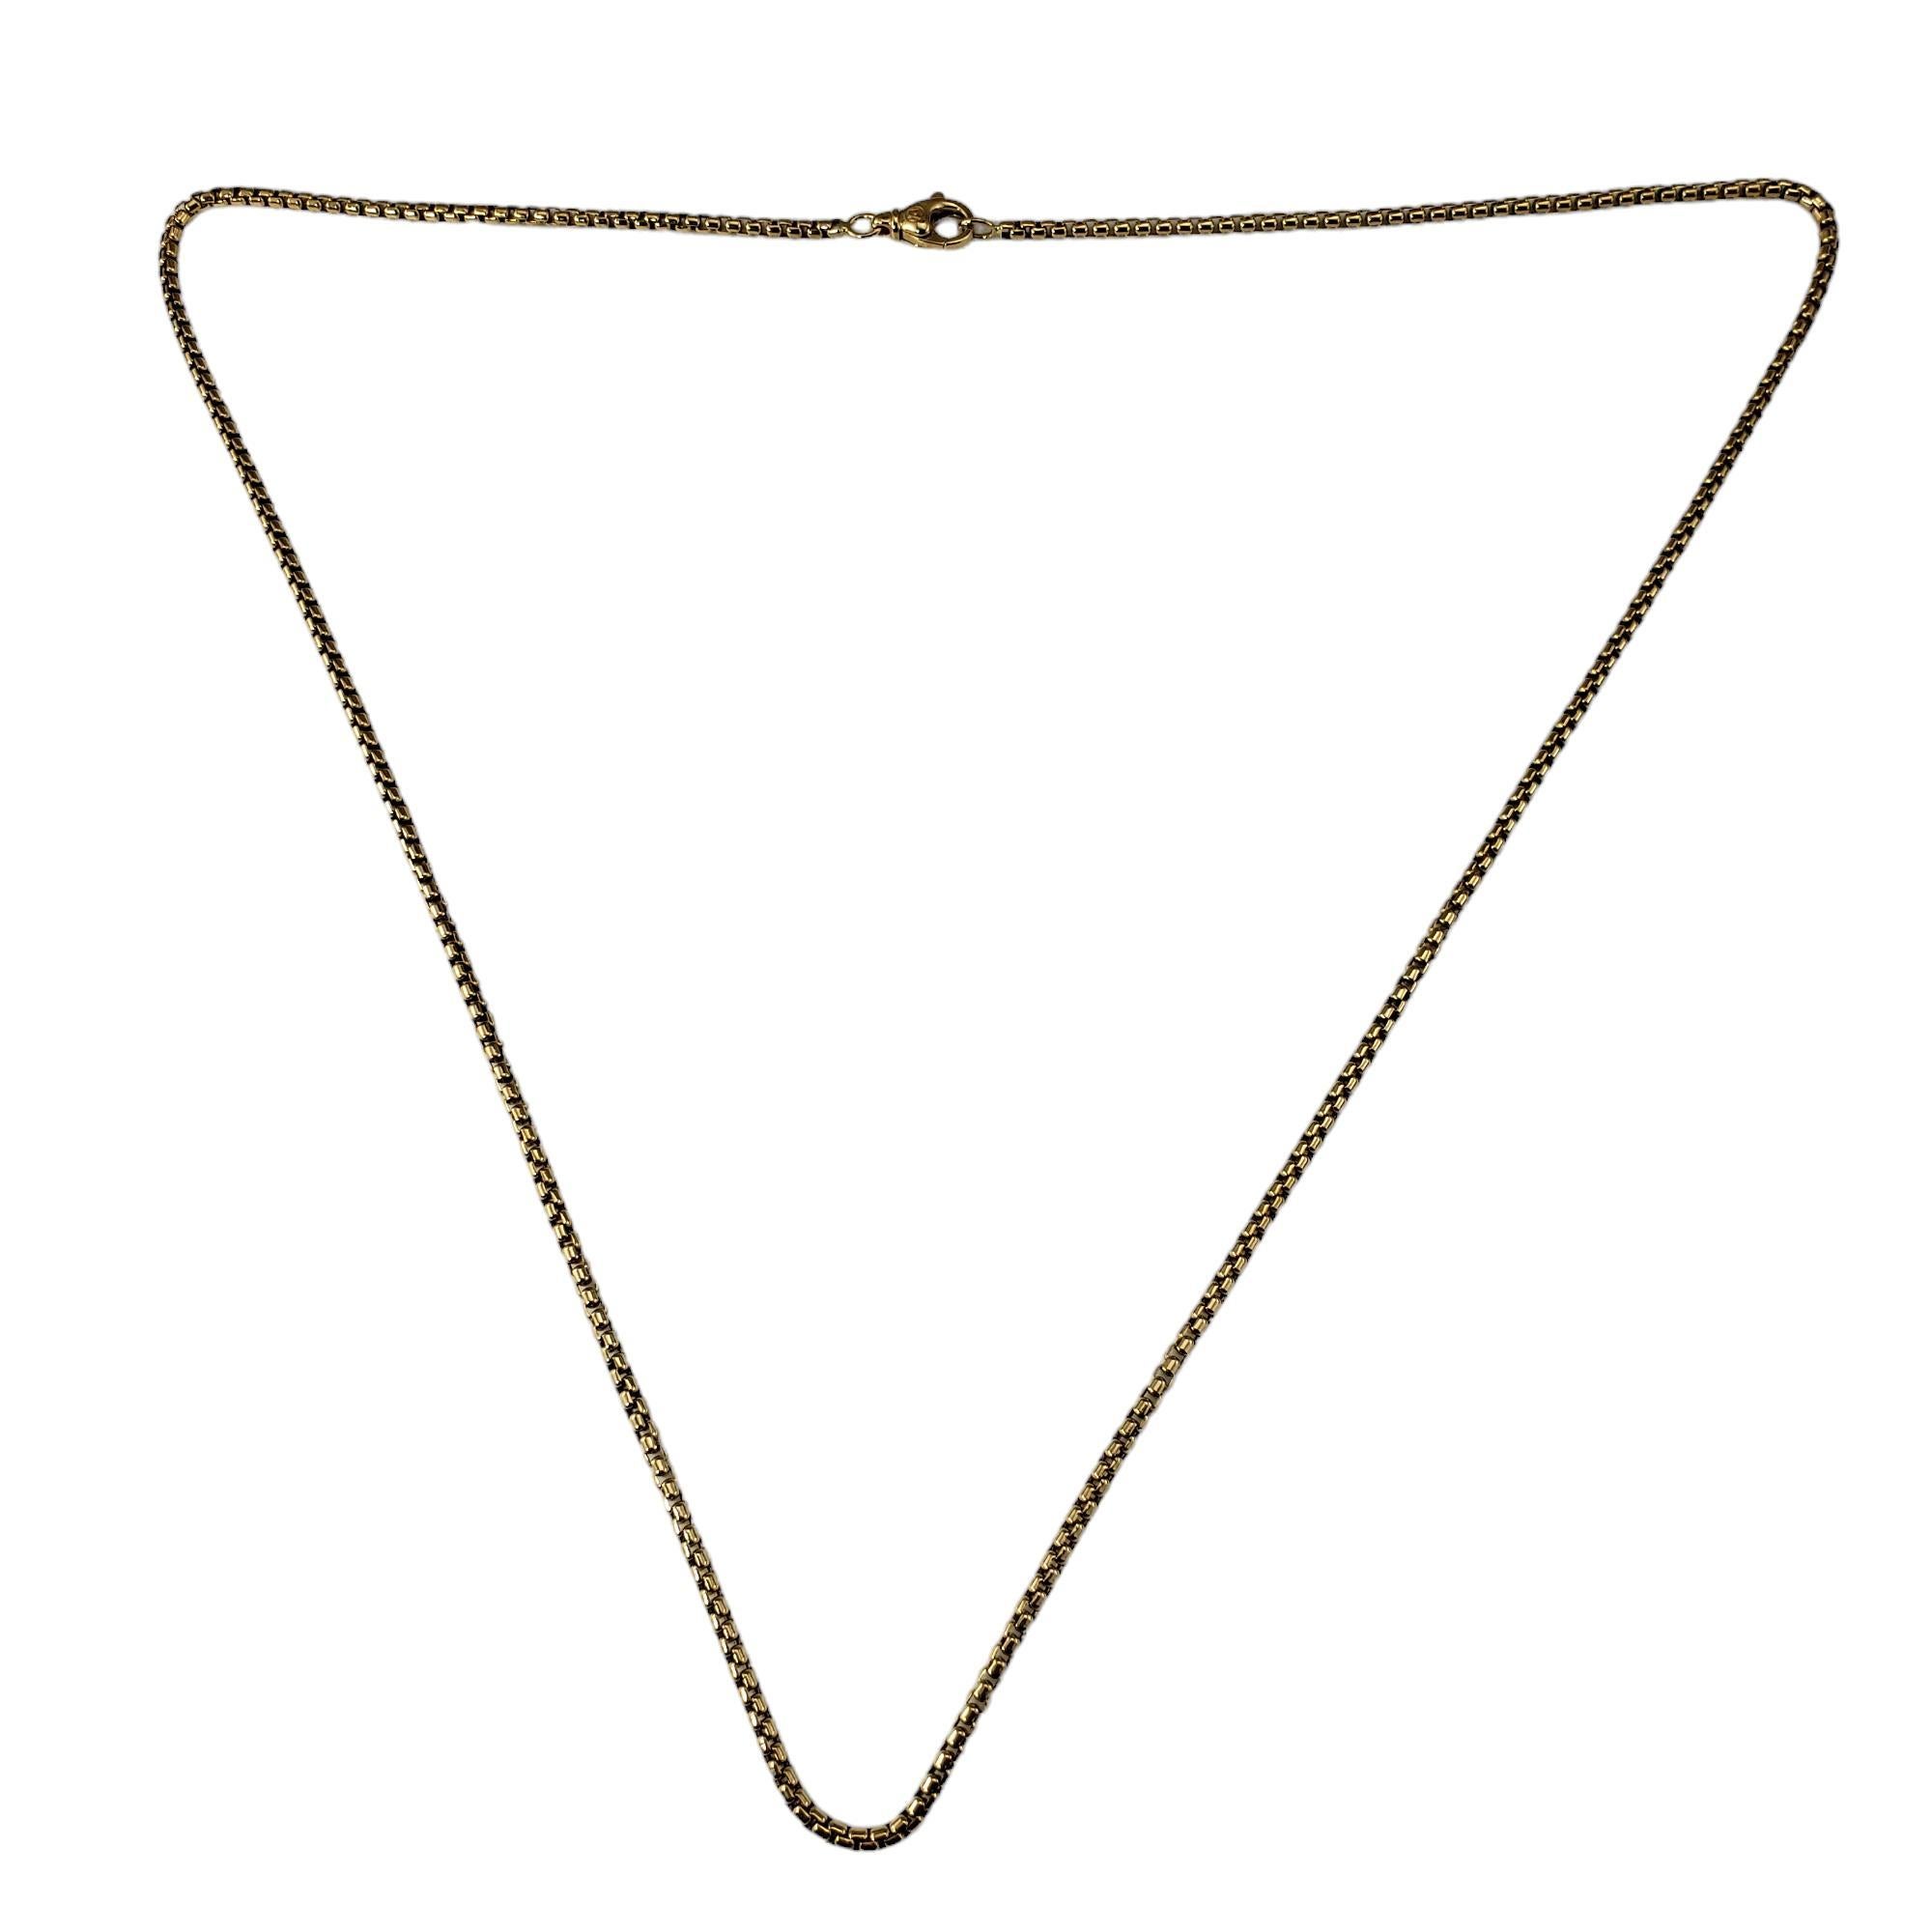 David Yurman 18K Yellow Gold Box Chain Necklace-

This elegant box chain necklace by David Yurman is crafted in classic 18K yellow gold.  

Width: 2.5 mm.

Size:  26 inches

Hallmark: DY 750

Weight:  9.9 dwt./ 15.4 gr.

Very good condition,